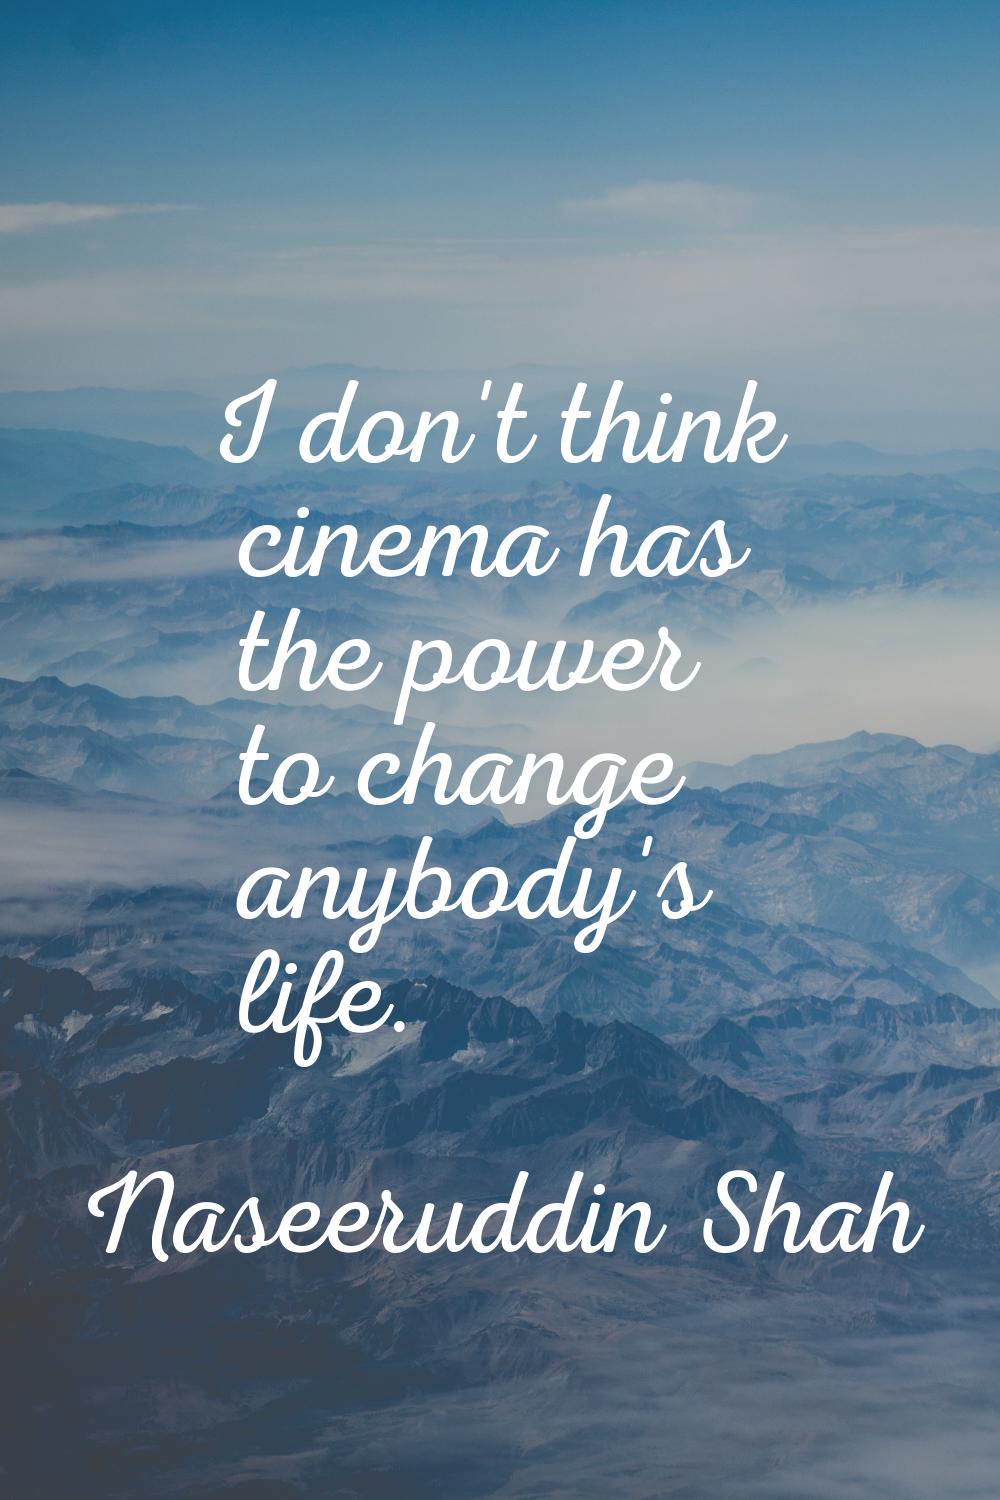 I don't think cinema has the power to change anybody's life.